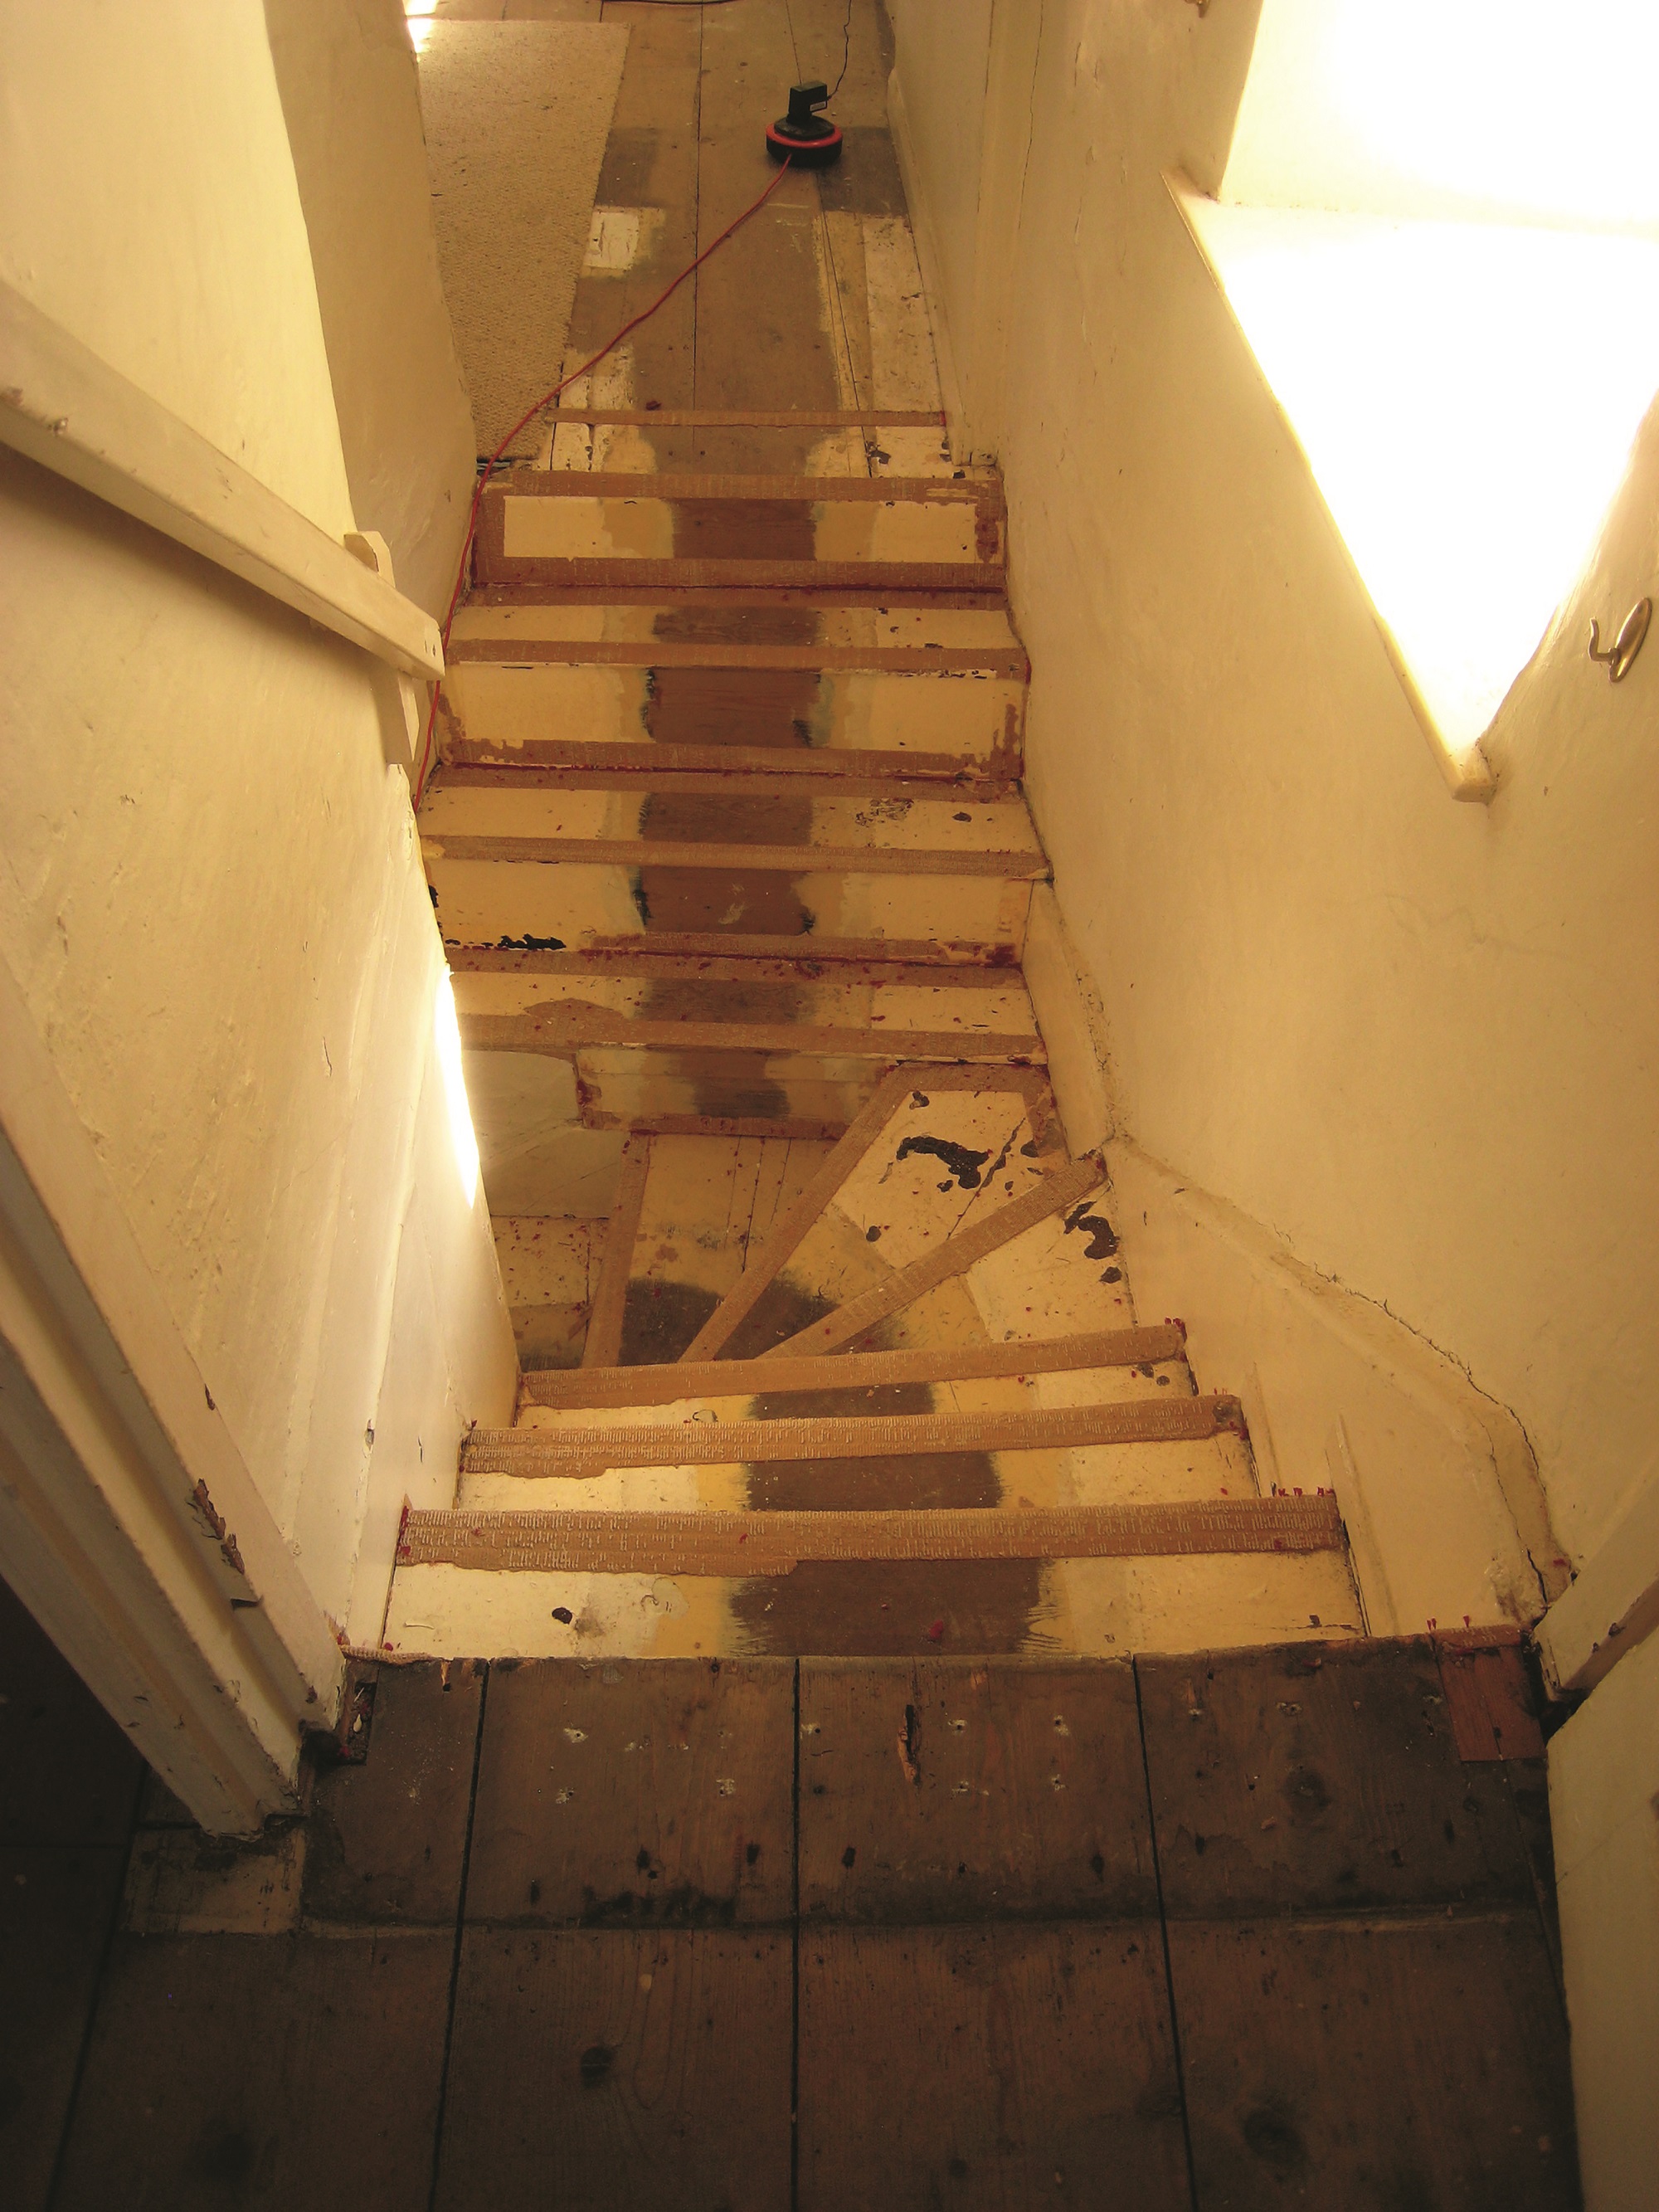 The treacherous old staircase between the bedrooms and bathroom